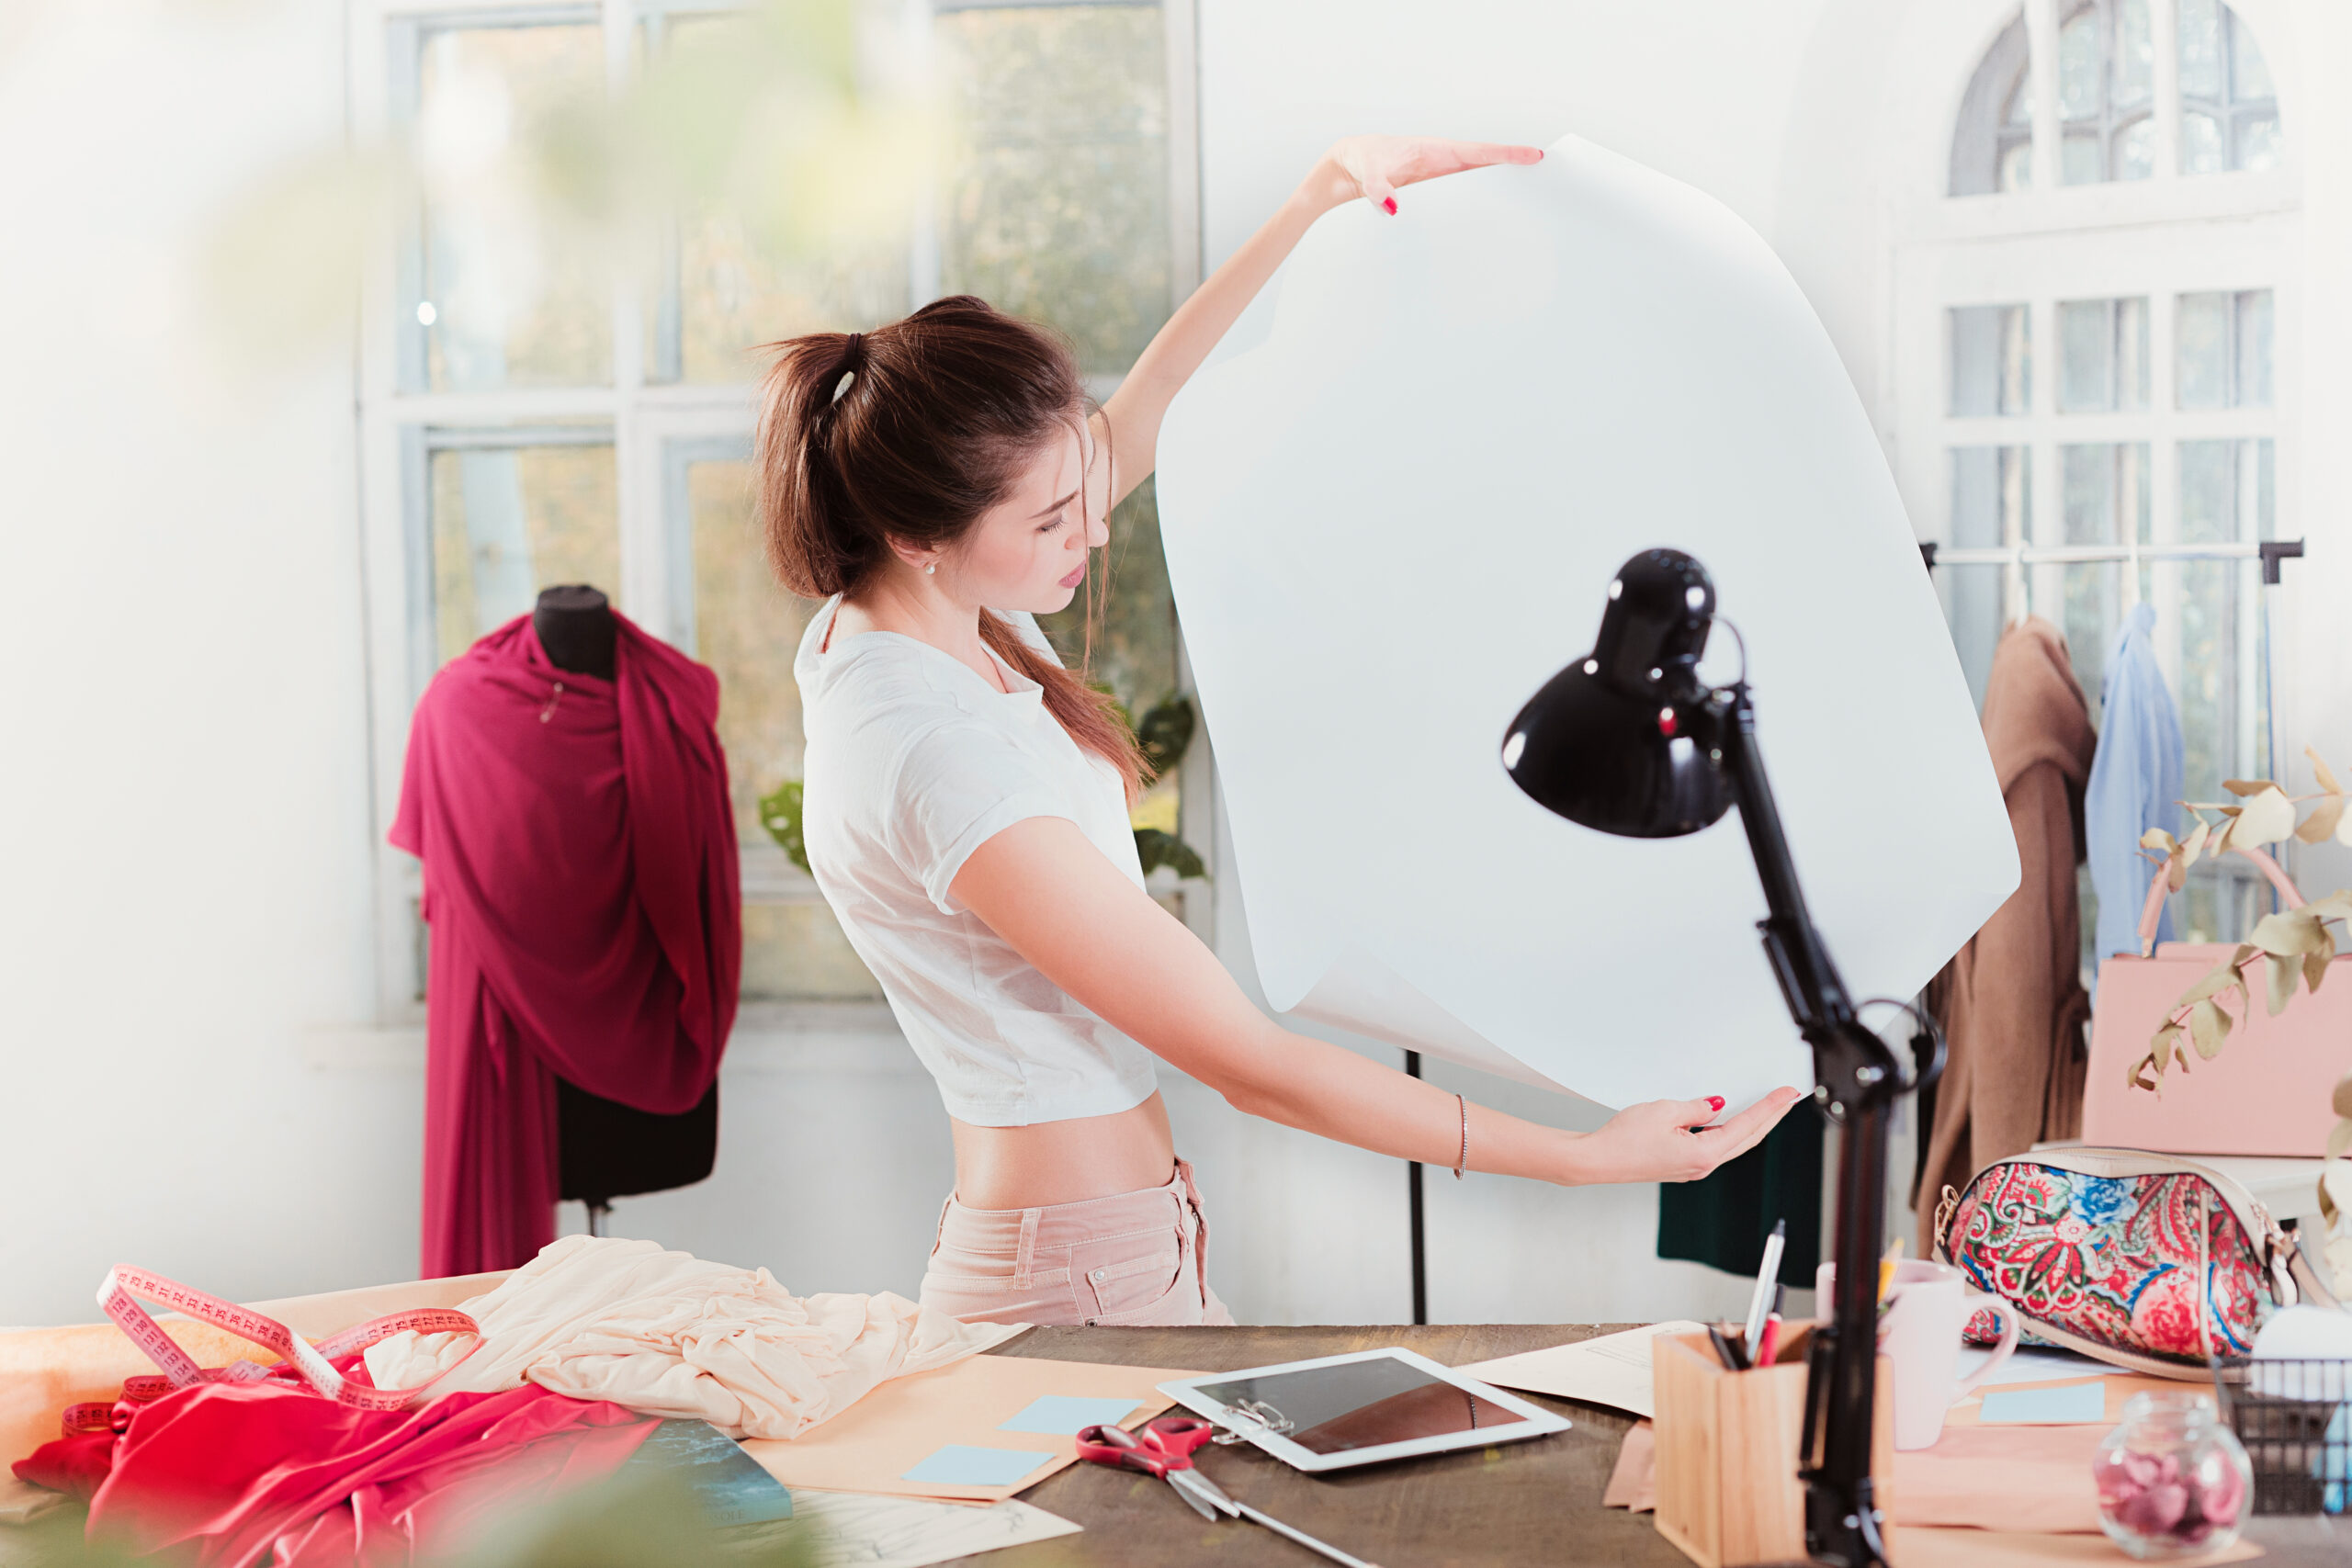 Behind the Scenes: A Day in the Life of a Fashion Blogger